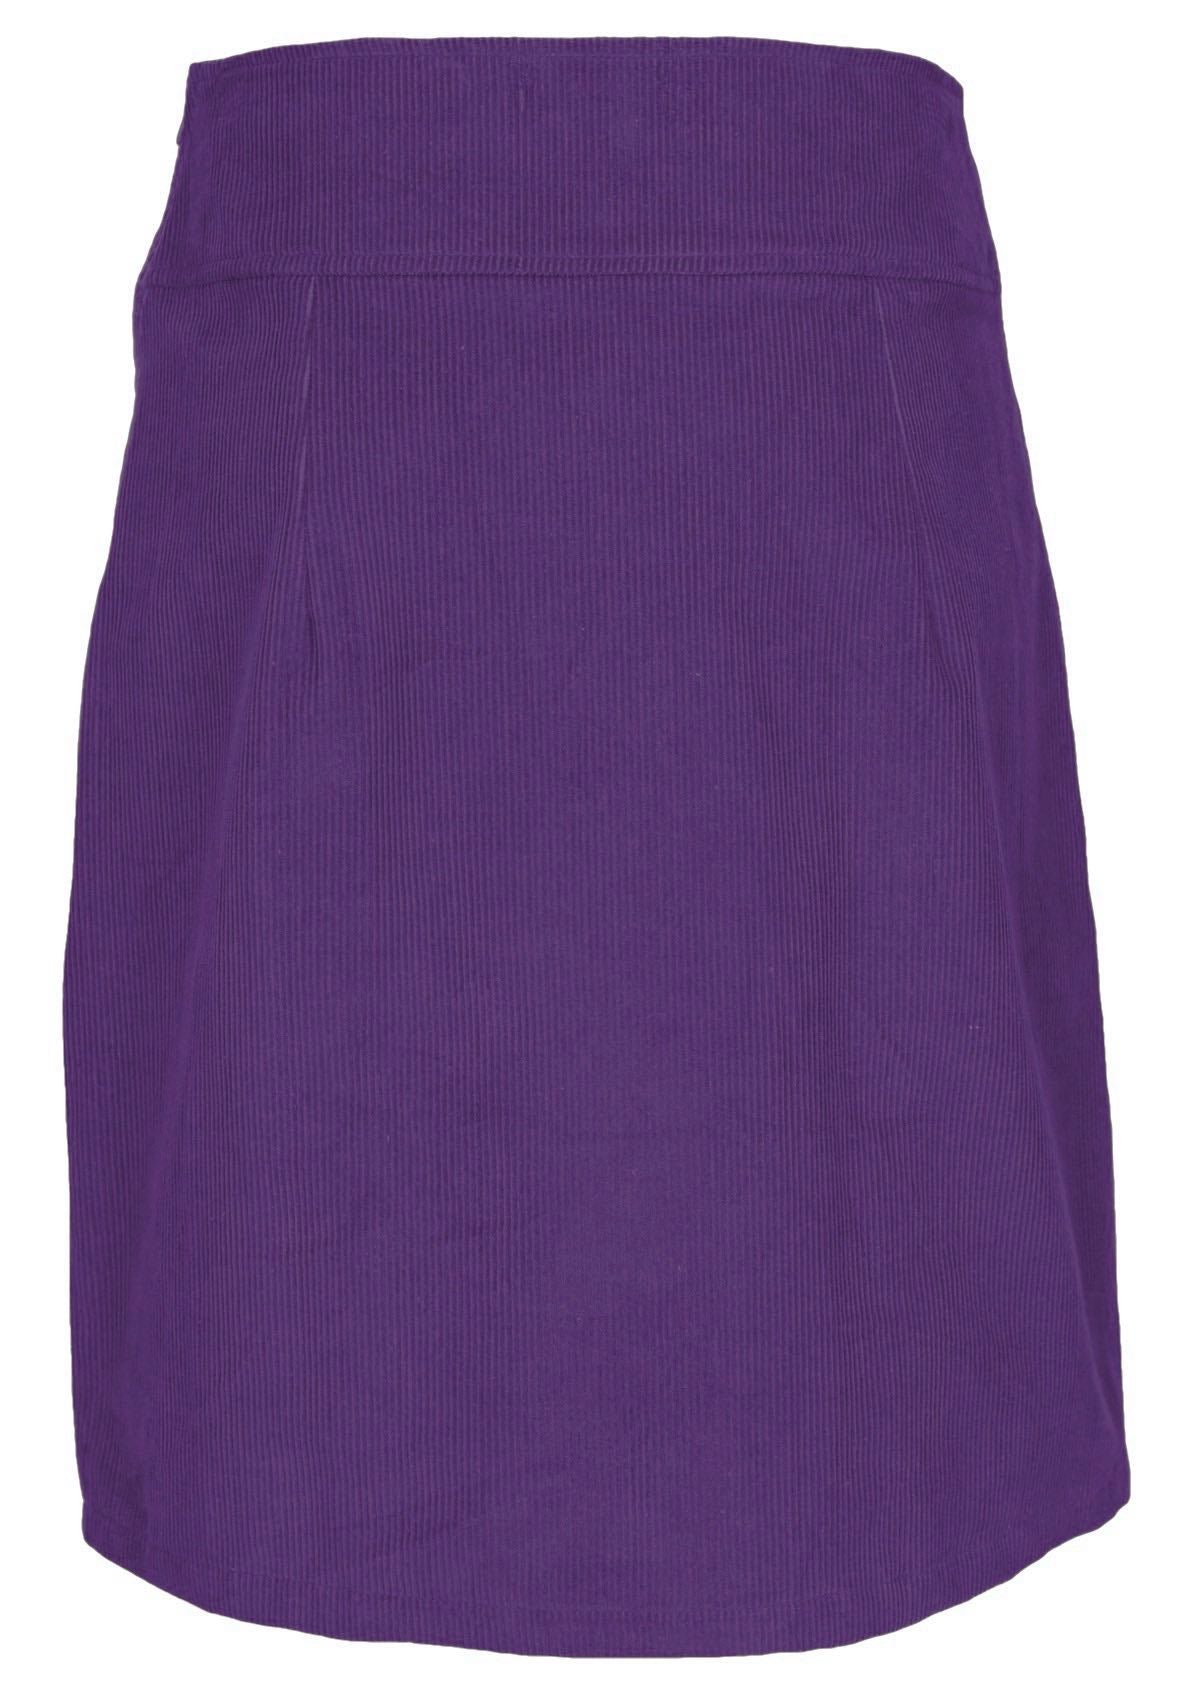 Purple 100% cotton mid length skirt with pockets. 